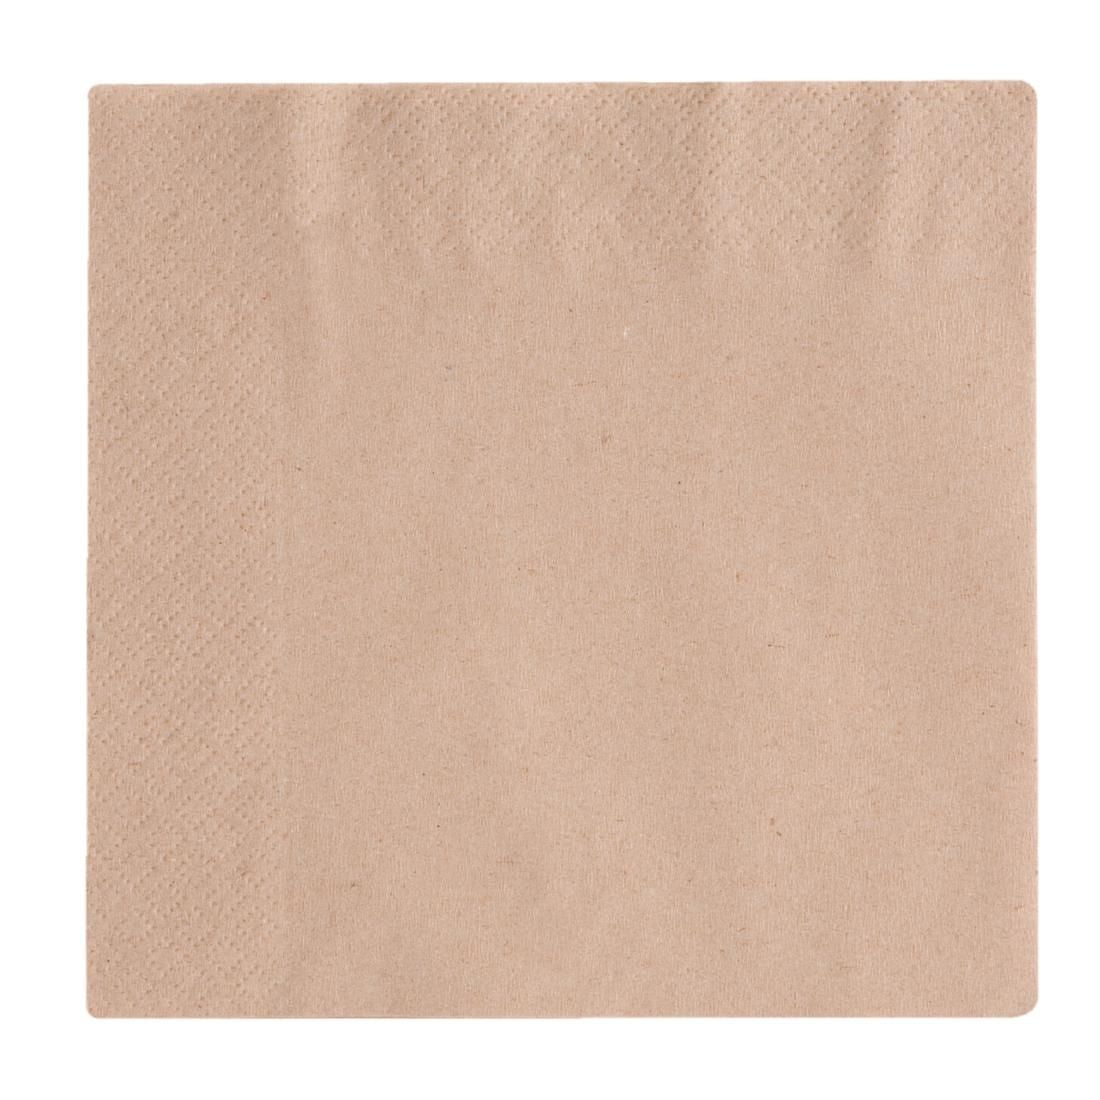 DW621 Vegware Compostable Unbleached Lunch Napkins 330mm (Pack of 2000)